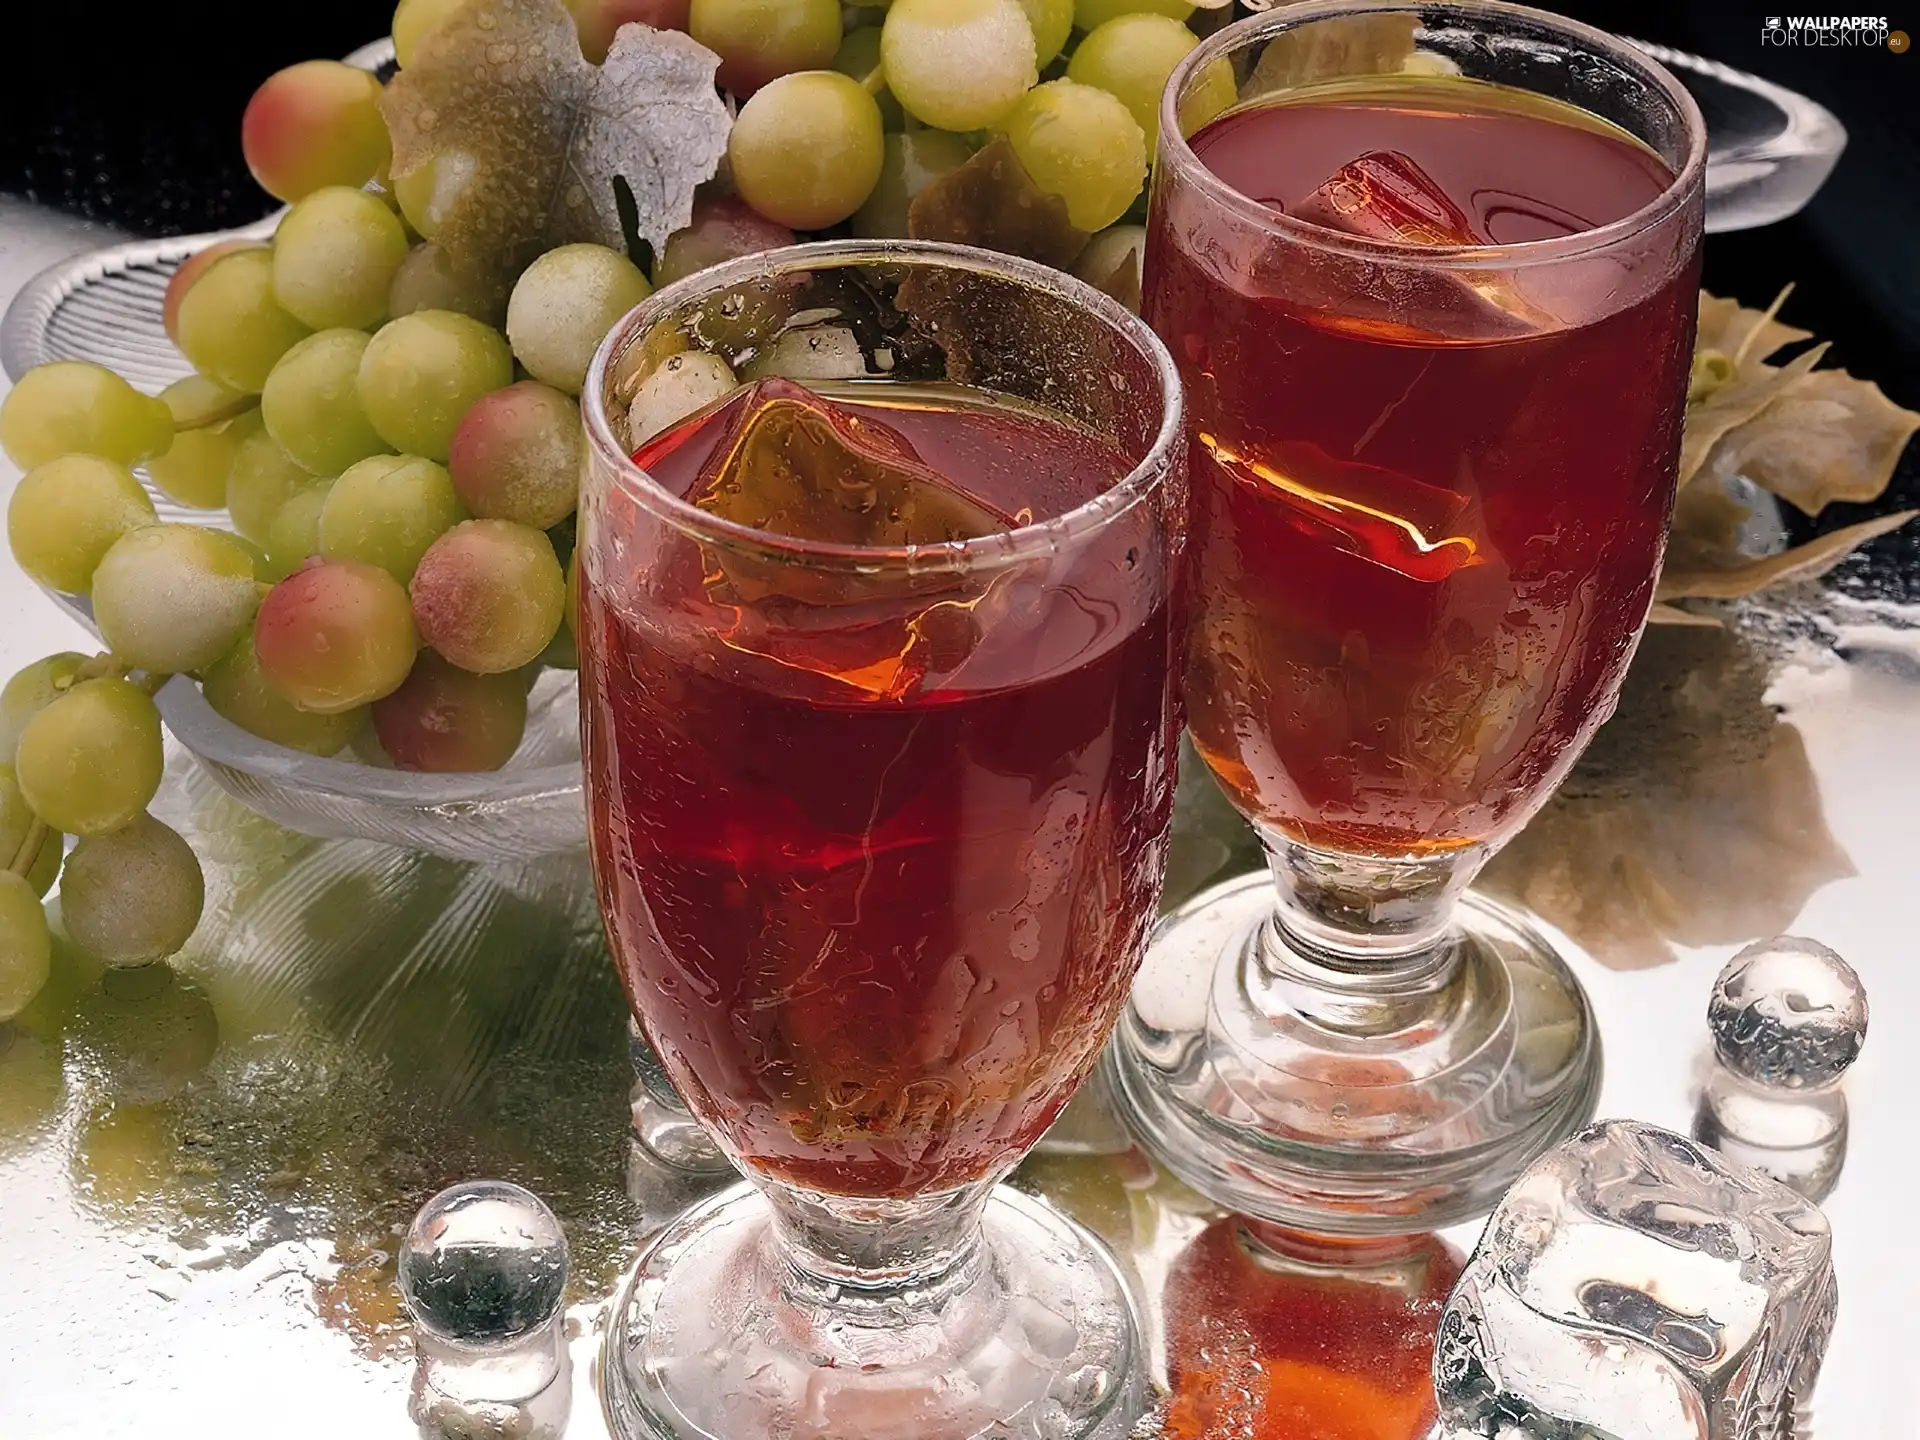 knuckle, ice, glasses, Wine, Grapes